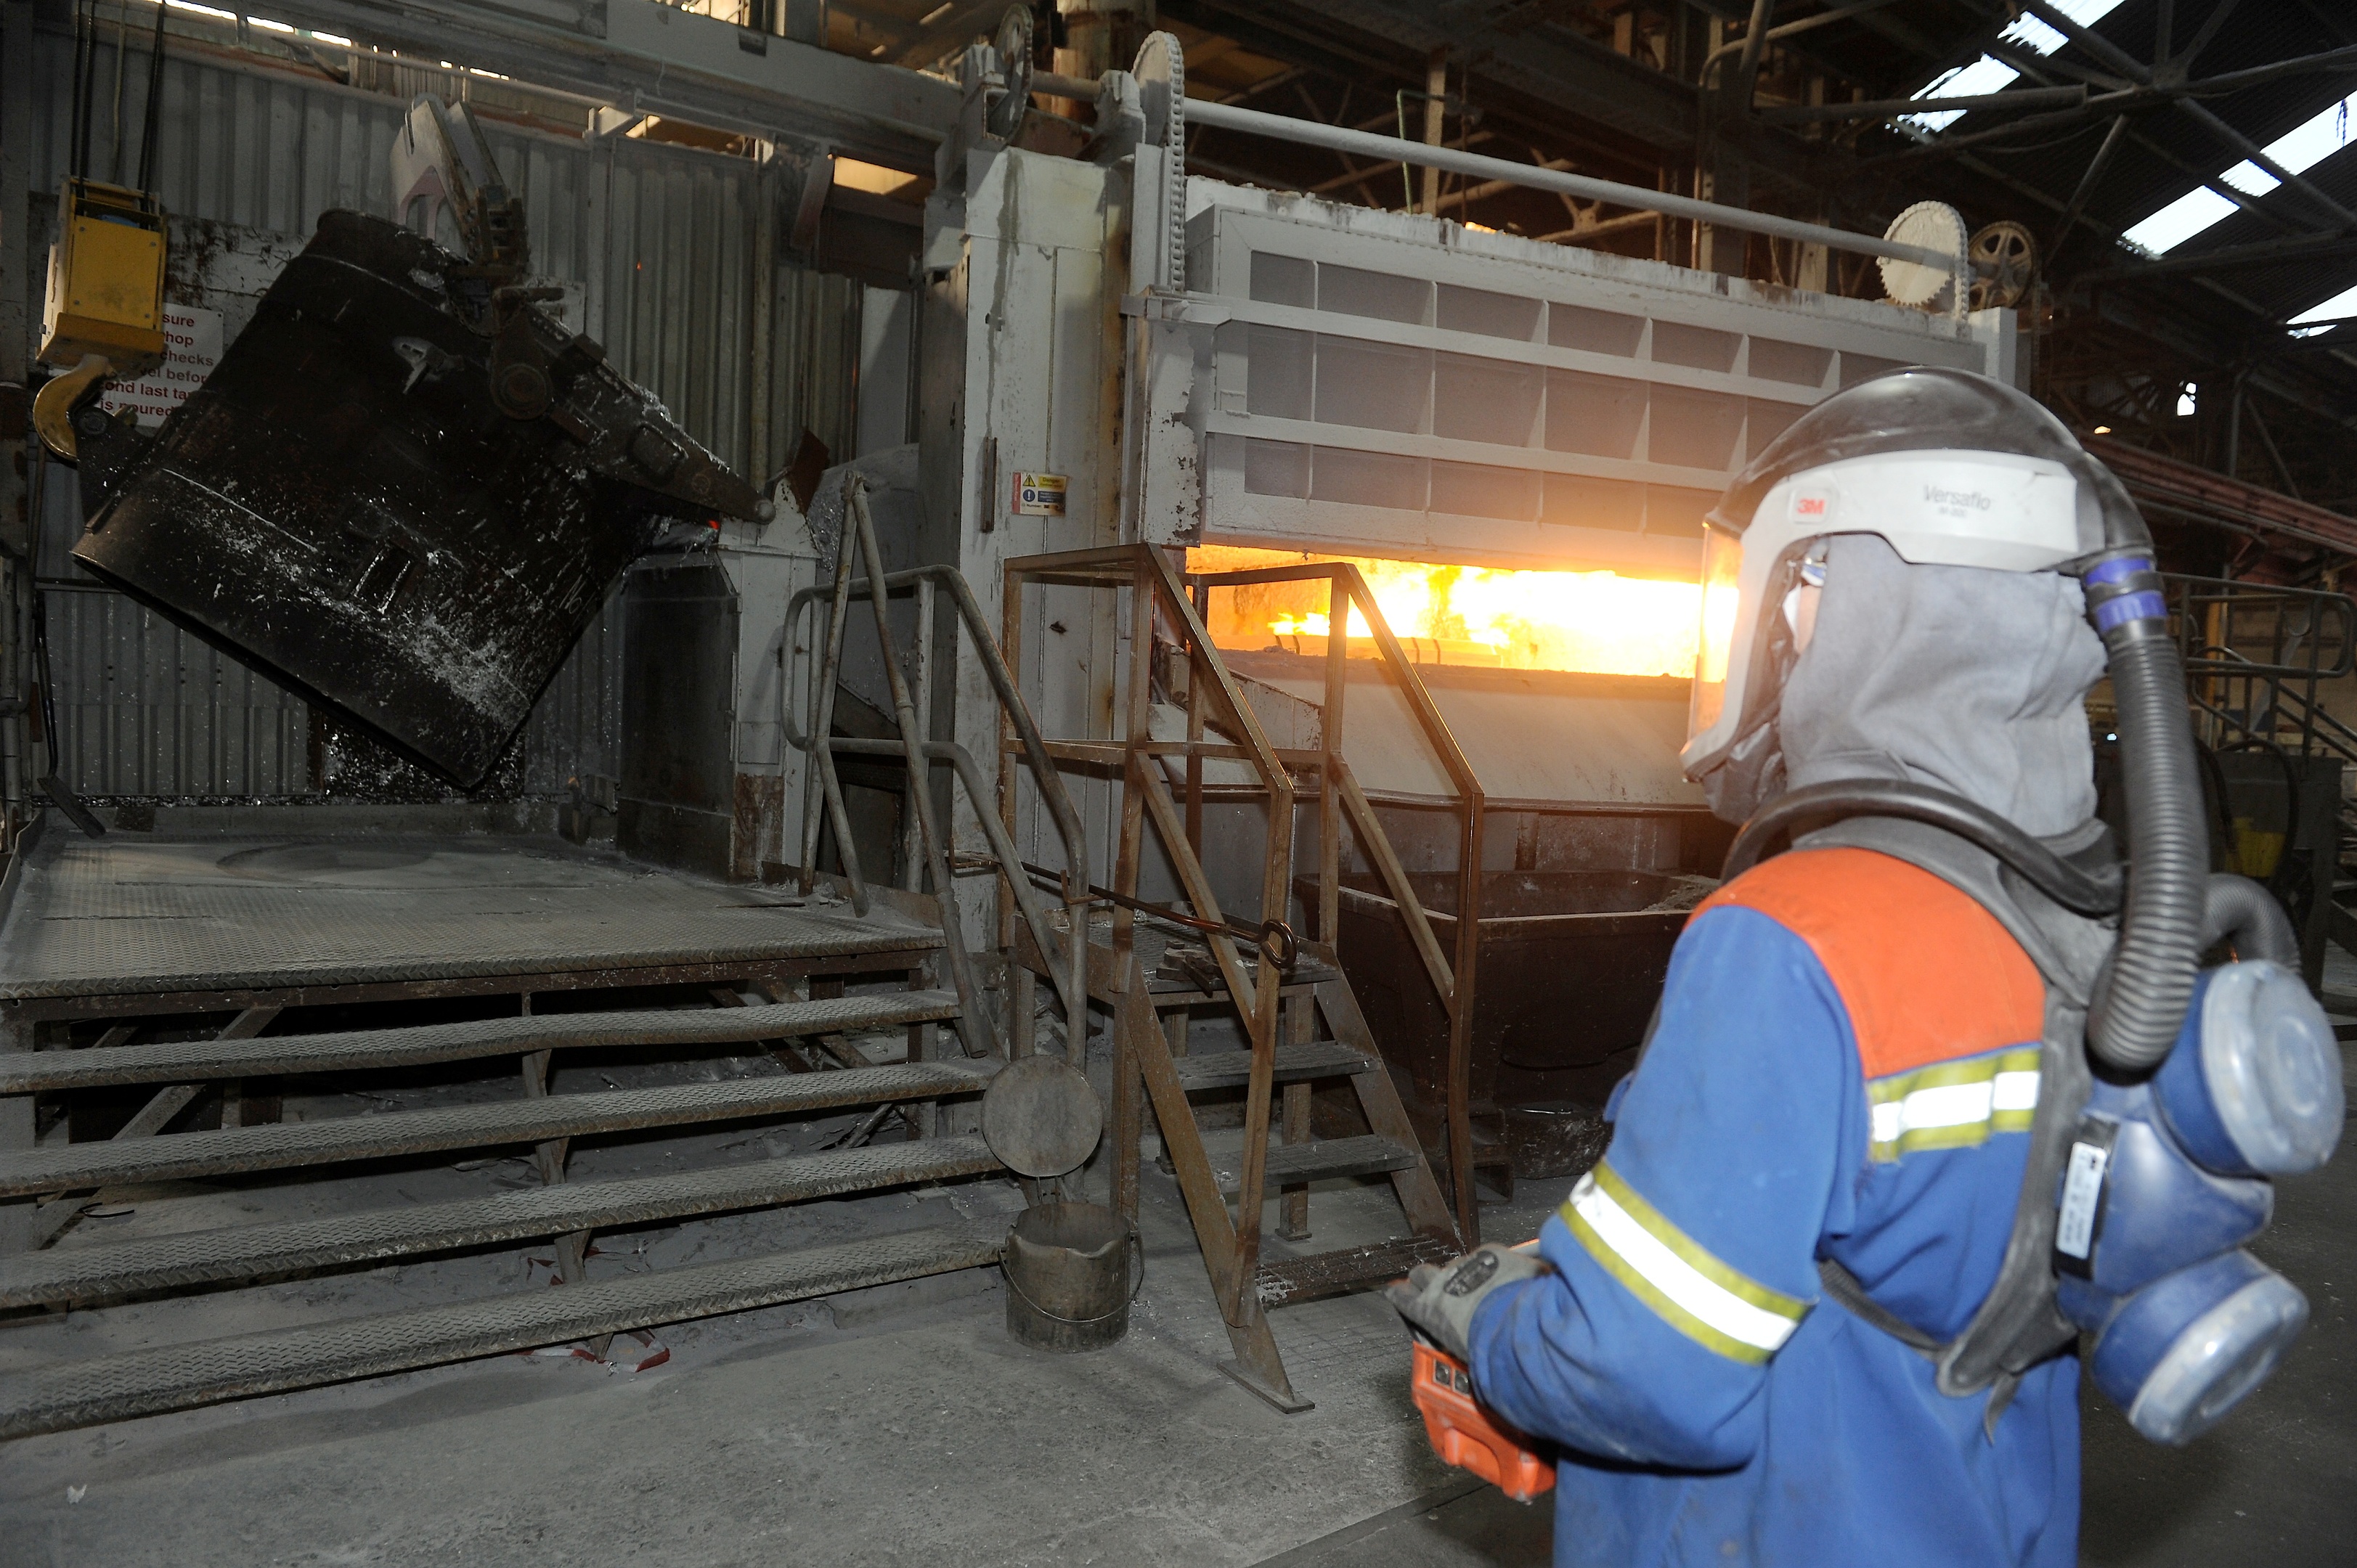 Fort William Aluminium Smelter. Casting Operator Michael Hartley at work pouring molten aluminium in the factory.
Picture by Sandy McCook.